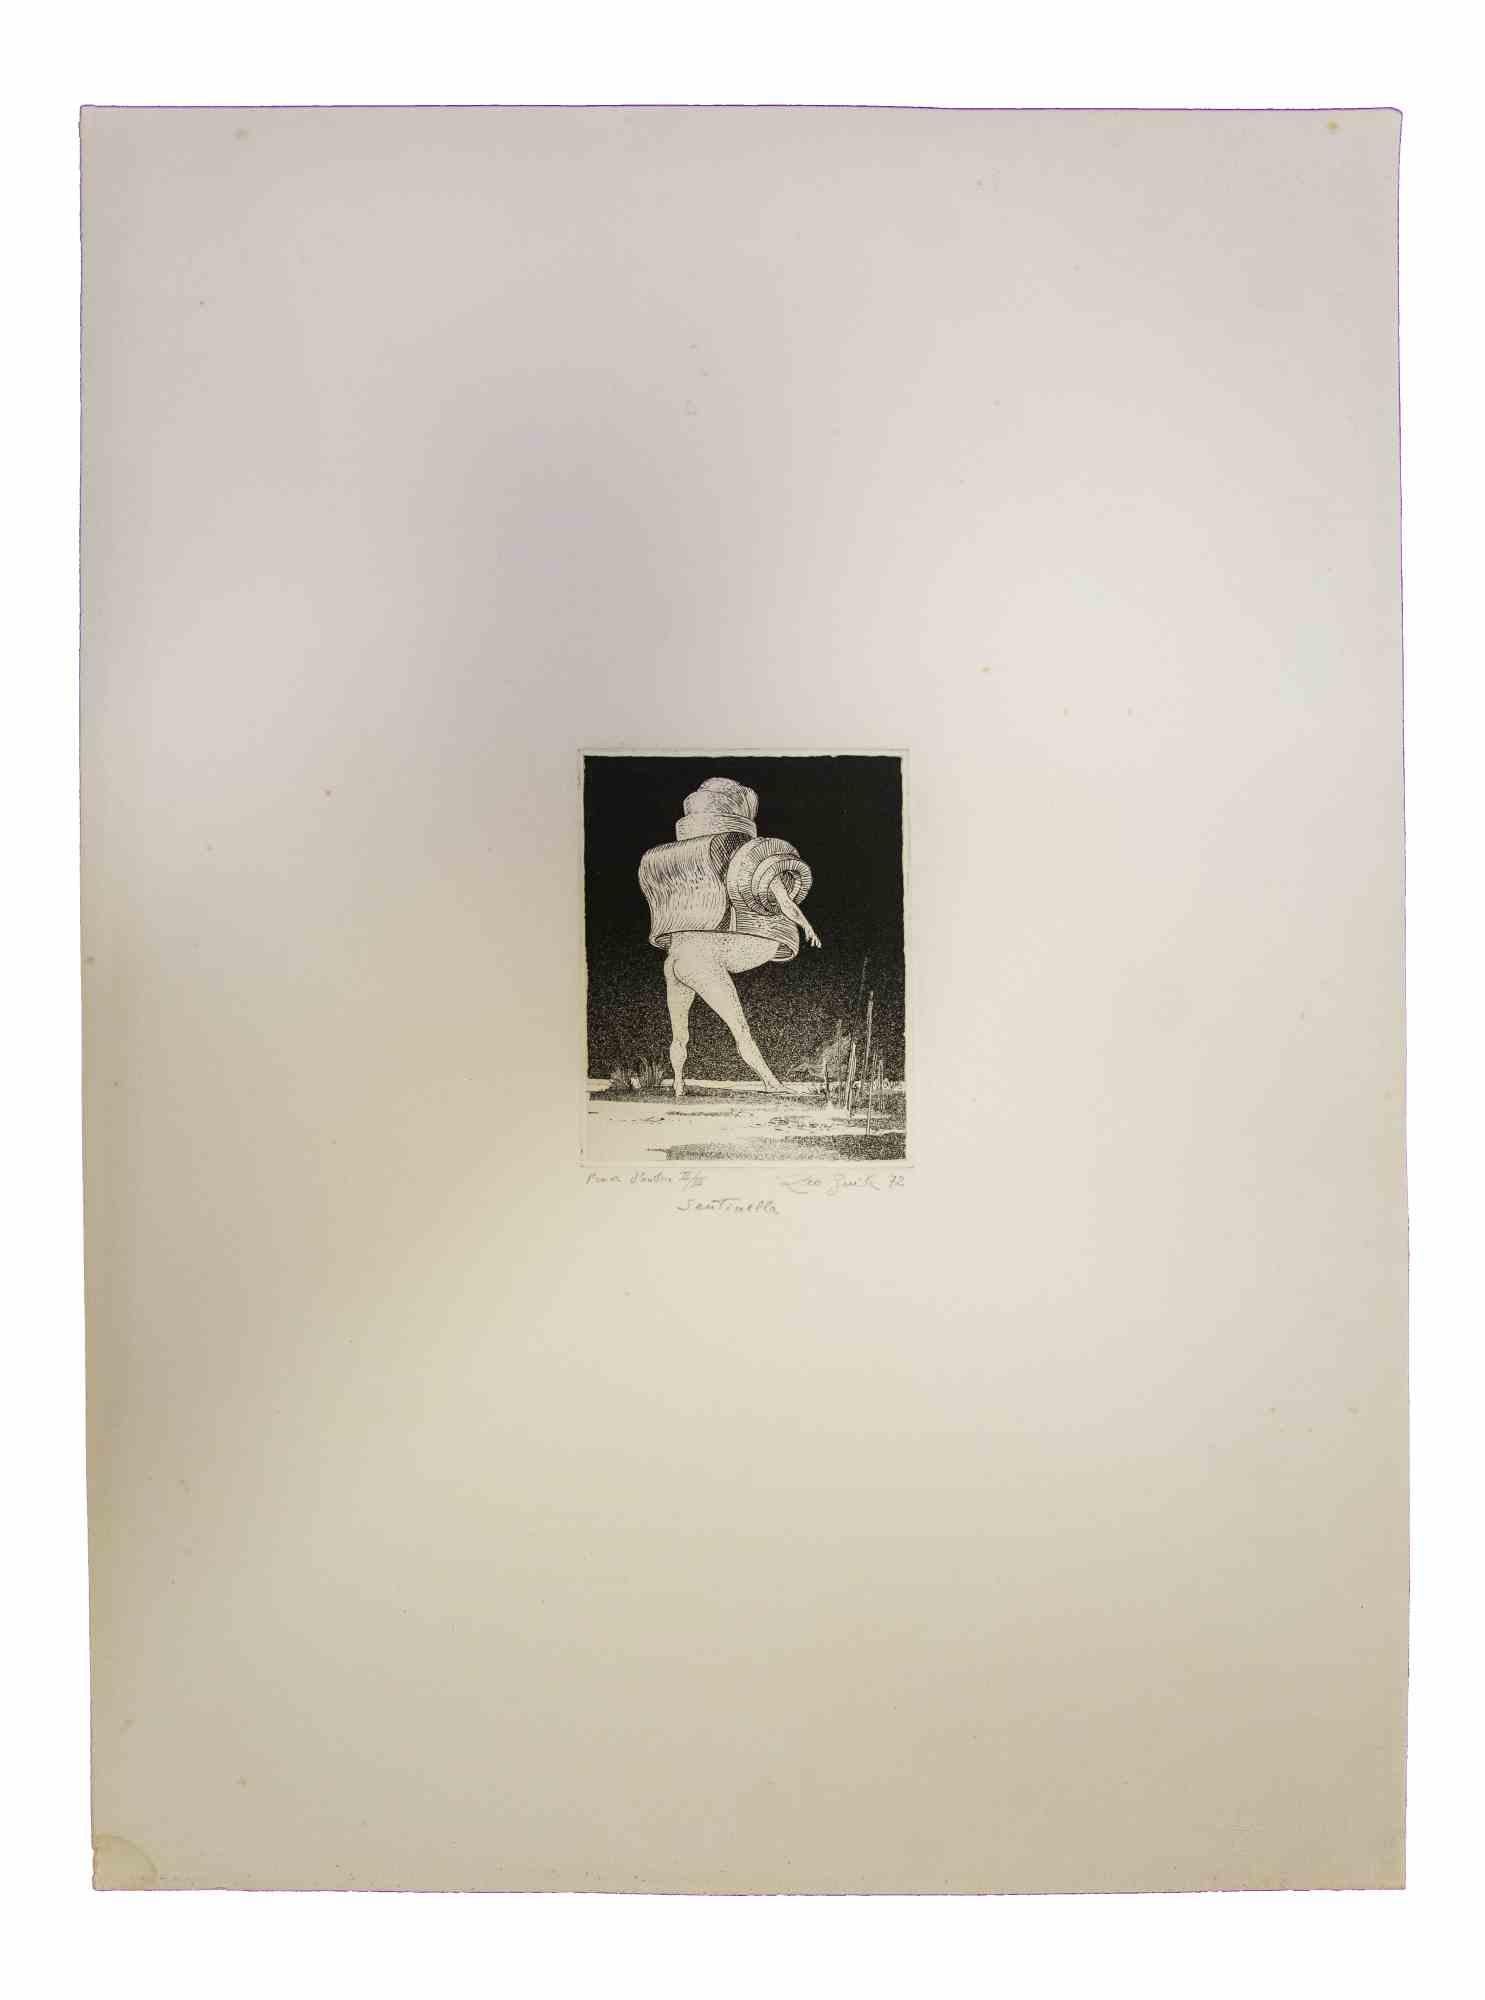 The Sentinel is an original etching realized by Leo Guida in 1970s.

Guter Zustand.

Mounted on a white cardboard passpartout (50x35 cm).

Hand-signed.

Leo Guida  (1992 - 2017). Sensitive to current issues, artistic movements and historical